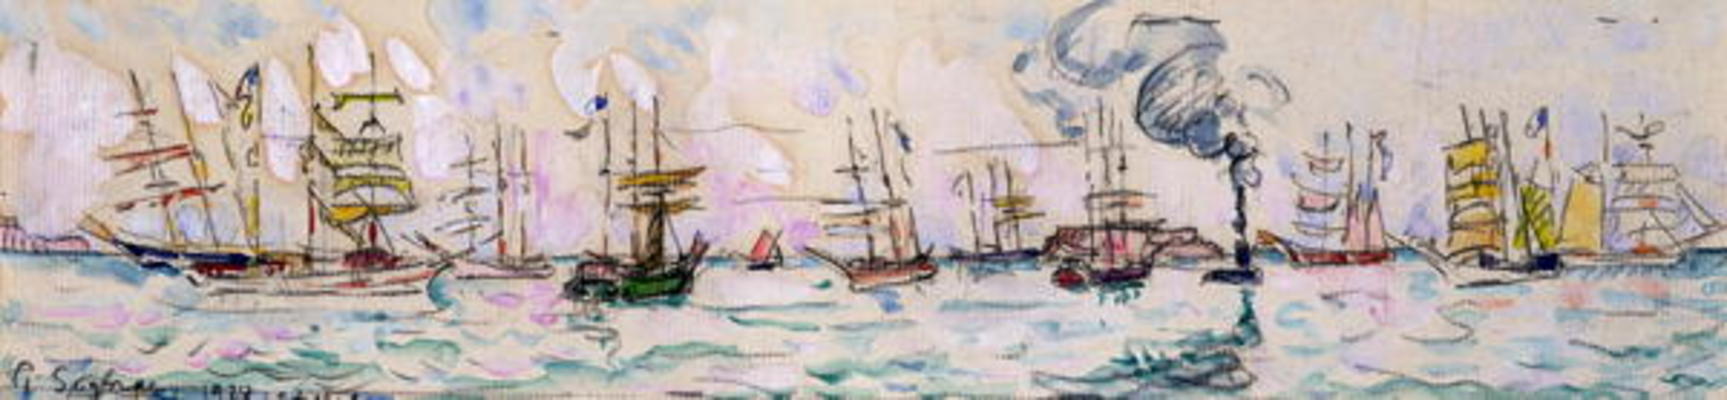 The Departure of the Fishing Trawlers to Newfoundland, 1928 (w/c on paper) à Paul Signac